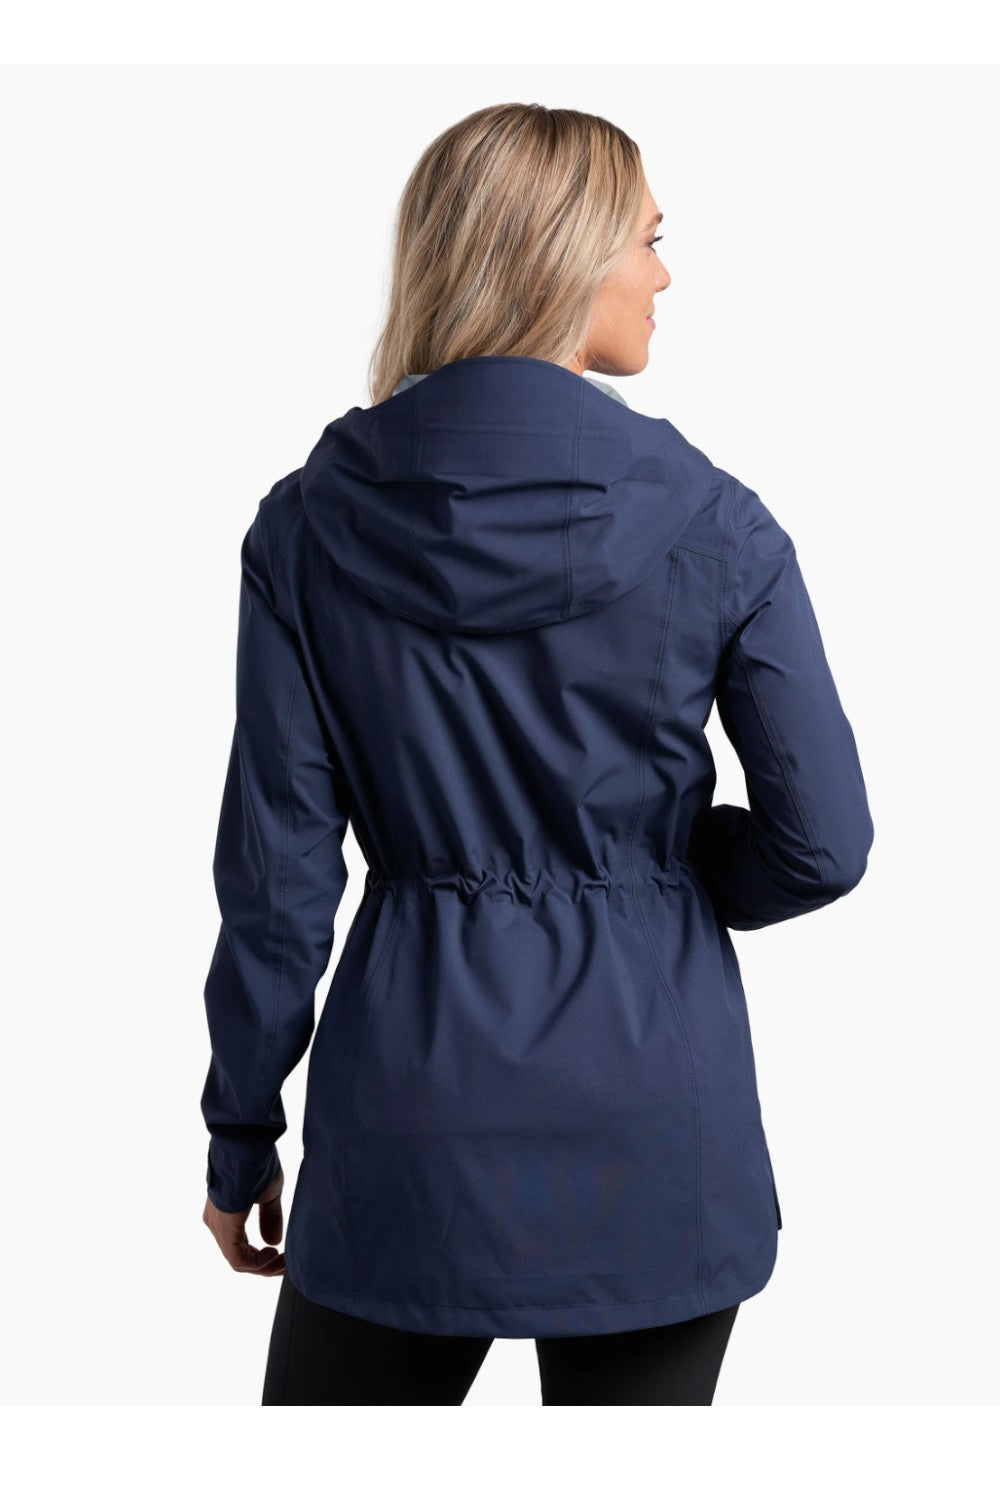 A rain jacket so soft and comfortable, you’ll want to wear it every day. The lightweight STRETCH VOYAGER combines premium breathability with advanced waterproof performance for superior comfort in all types of weather. Soft, silent, and highly flexible, this jacket delivers an impeccable fit and is built to last. Trail tough and forecast-friendly! MATCHED BY NO ONE!